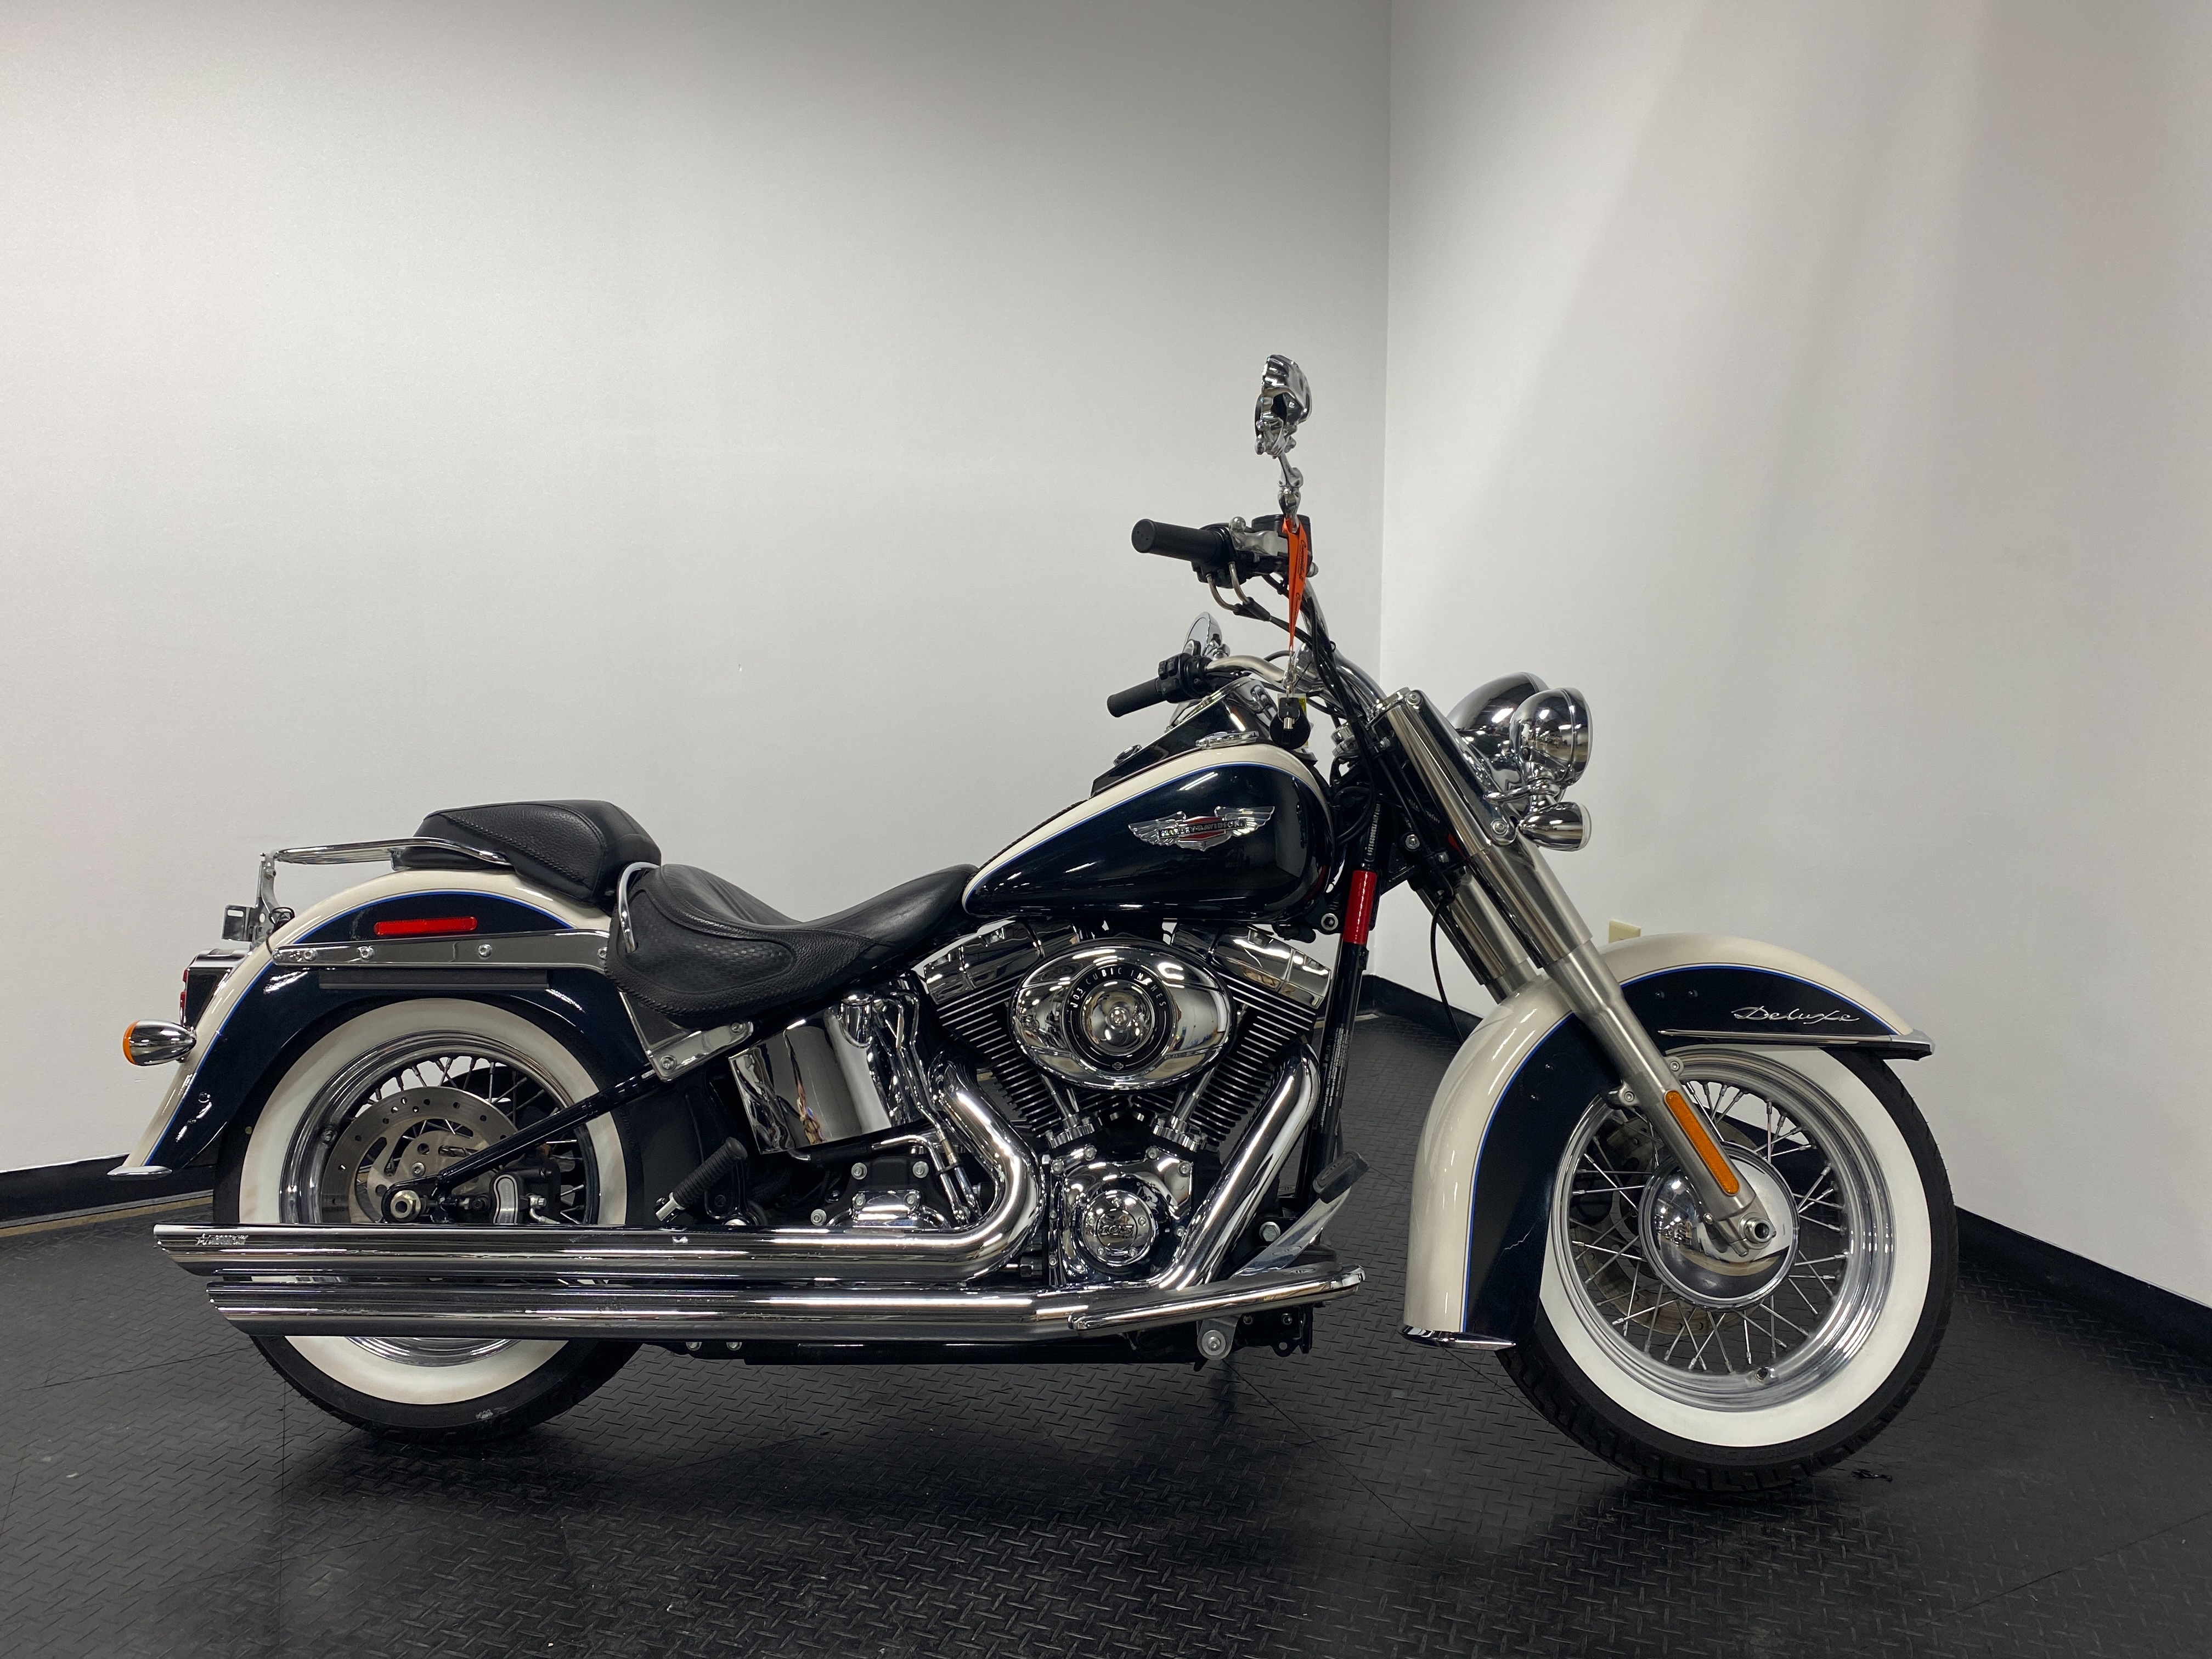 2013 Harley-Davidson Softail Deluxe at Cannonball Harley-Davidson